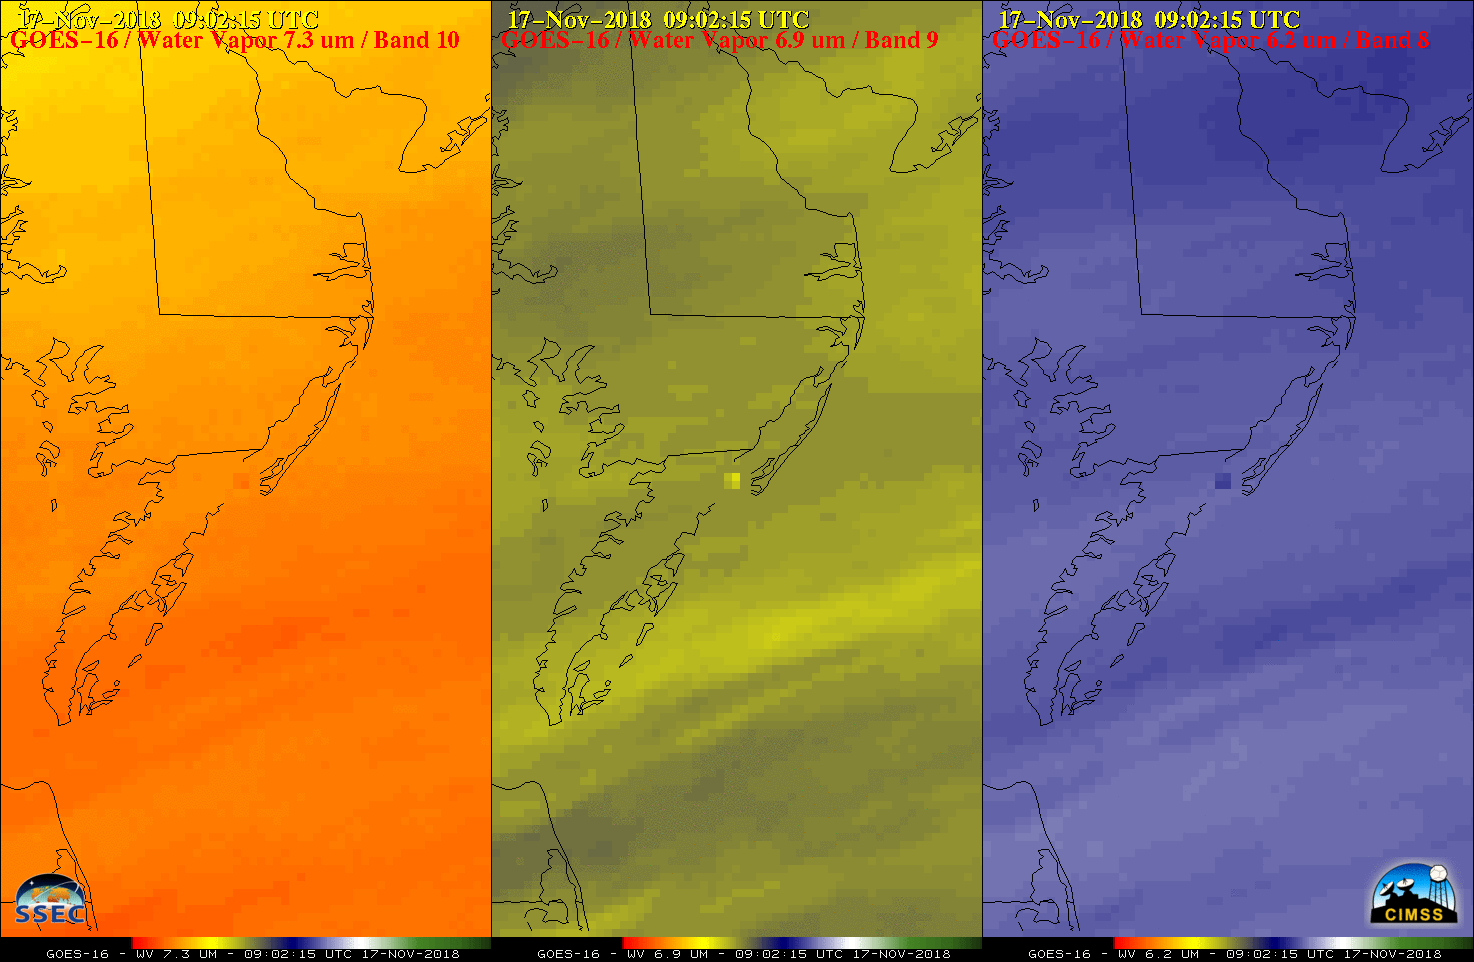 GOES-16 Low-level (7.3 µm, left). Mid-level (6.9 µm, center) and Upper-level (6.2 µm, right) Water Vapor images [click to play animation | MP4]